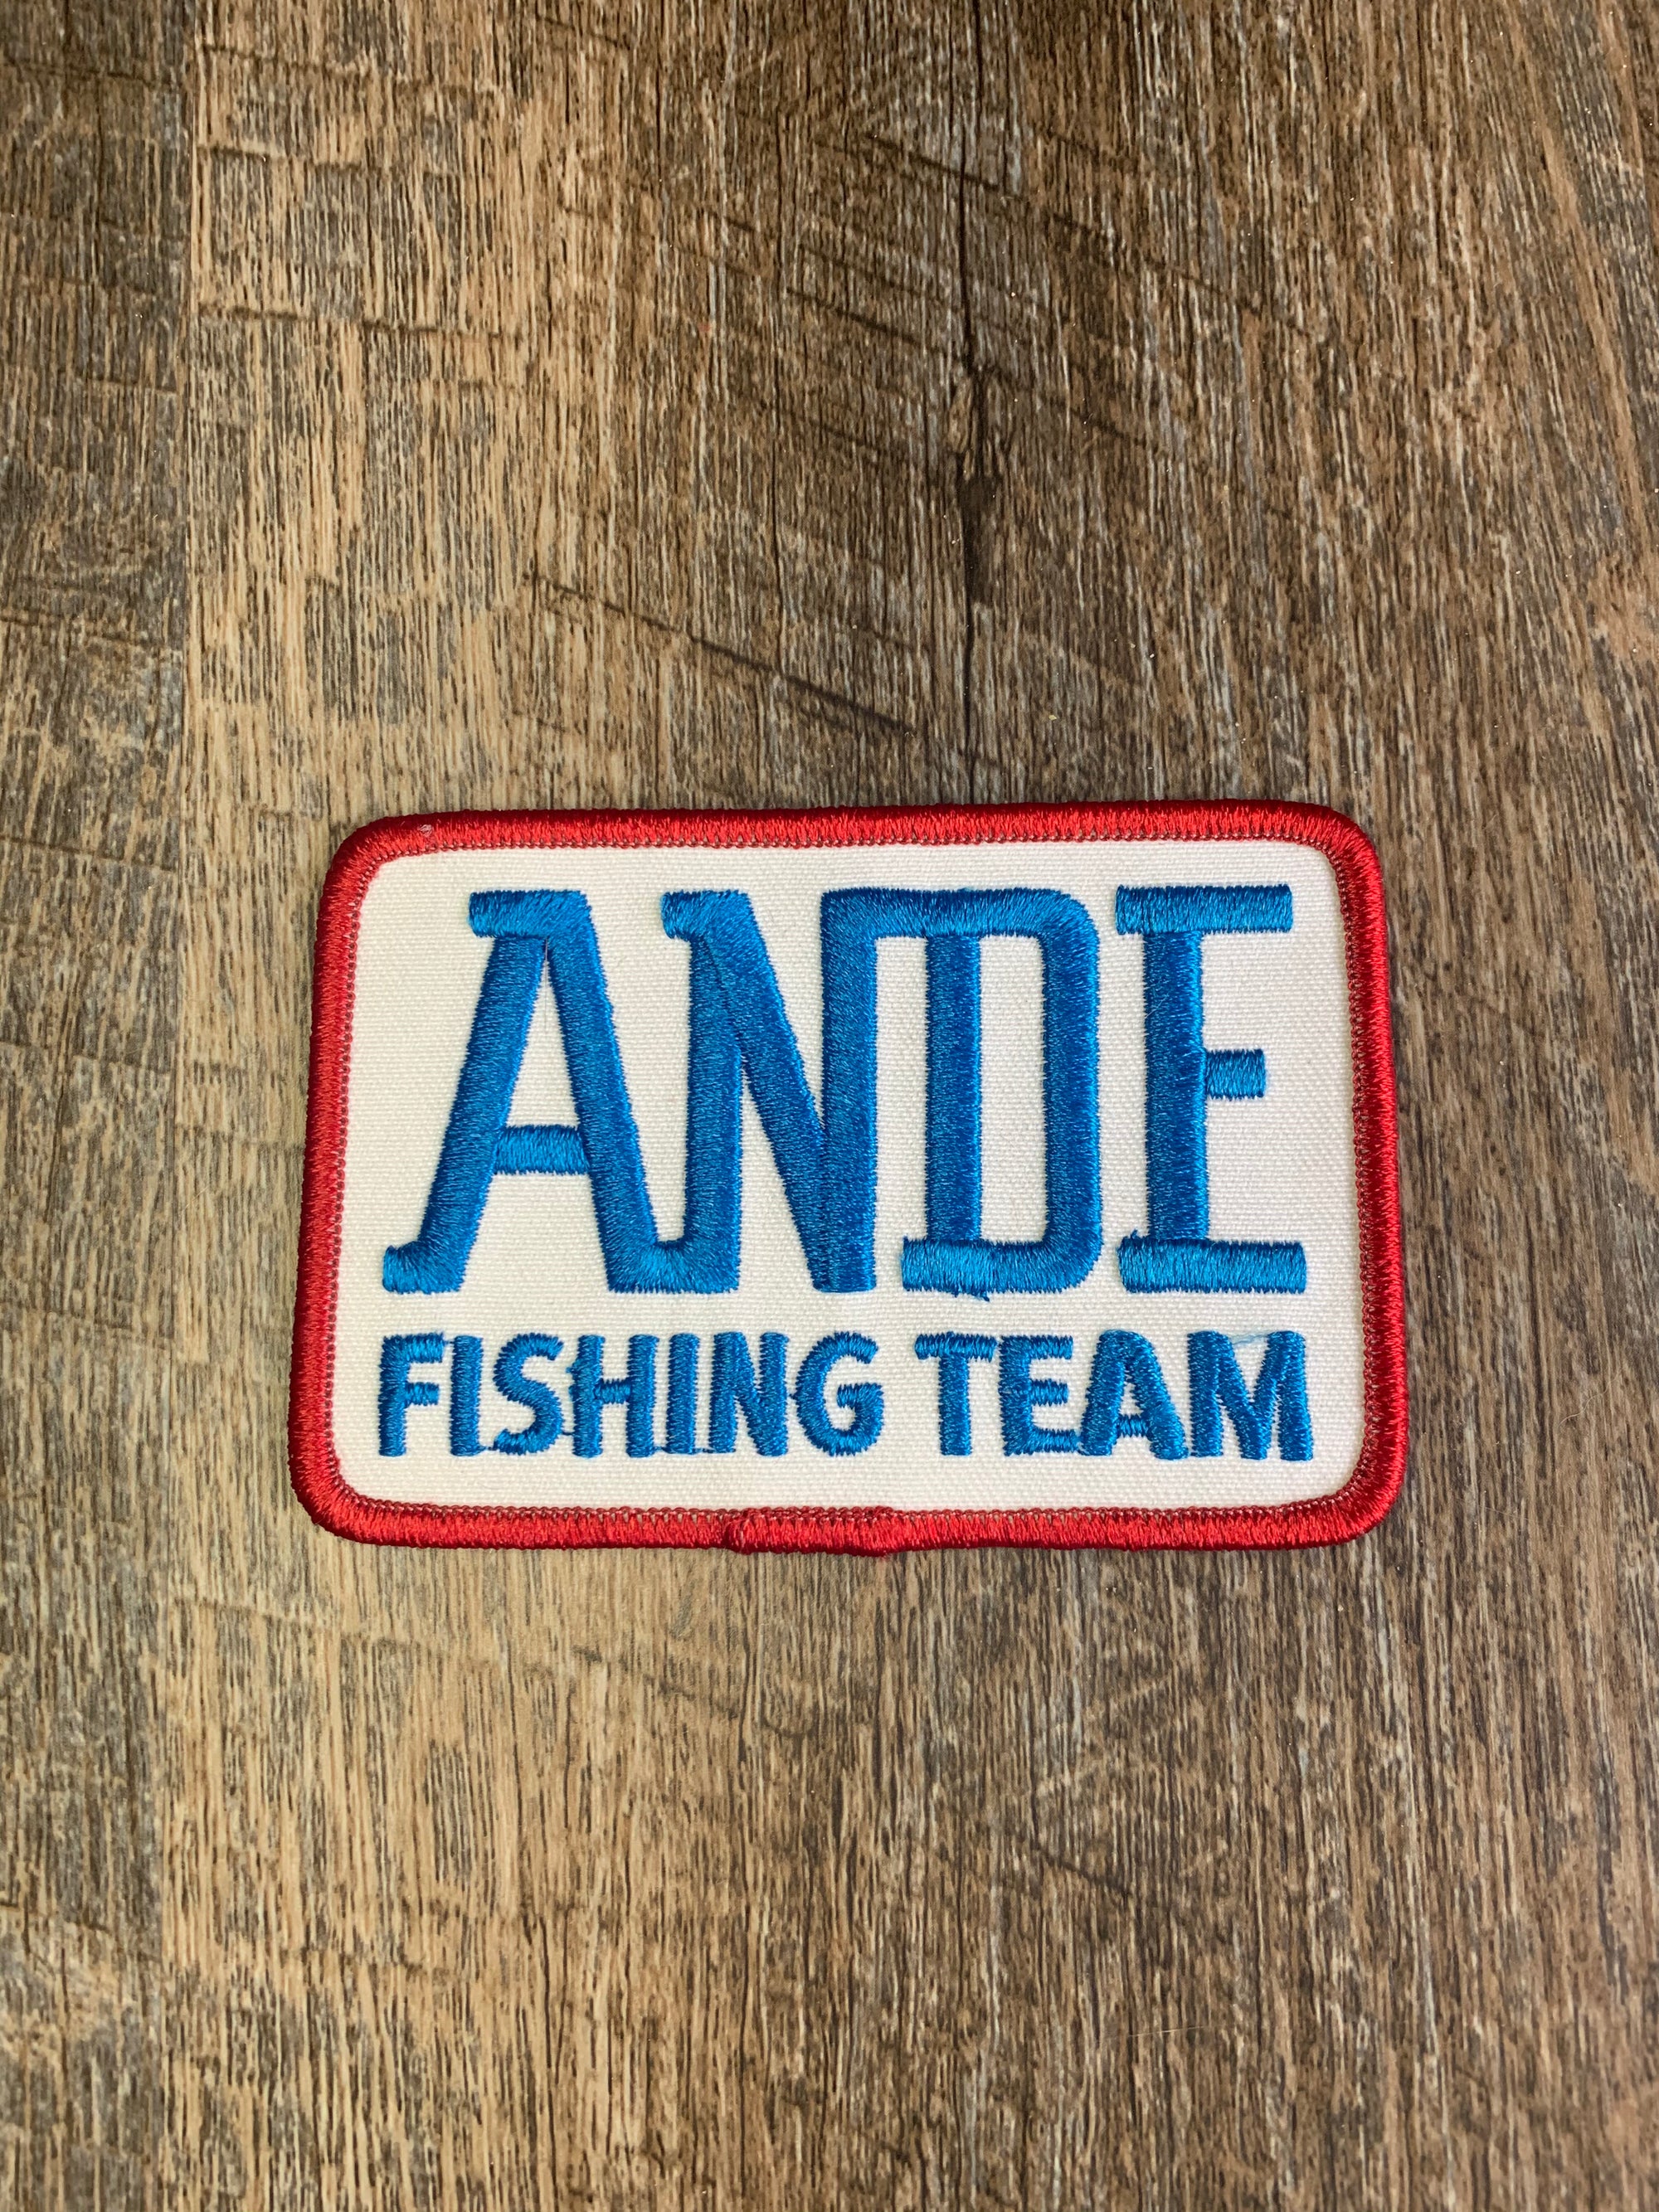 Ande Fishing Team, Fish, Rods, Water, Lakes